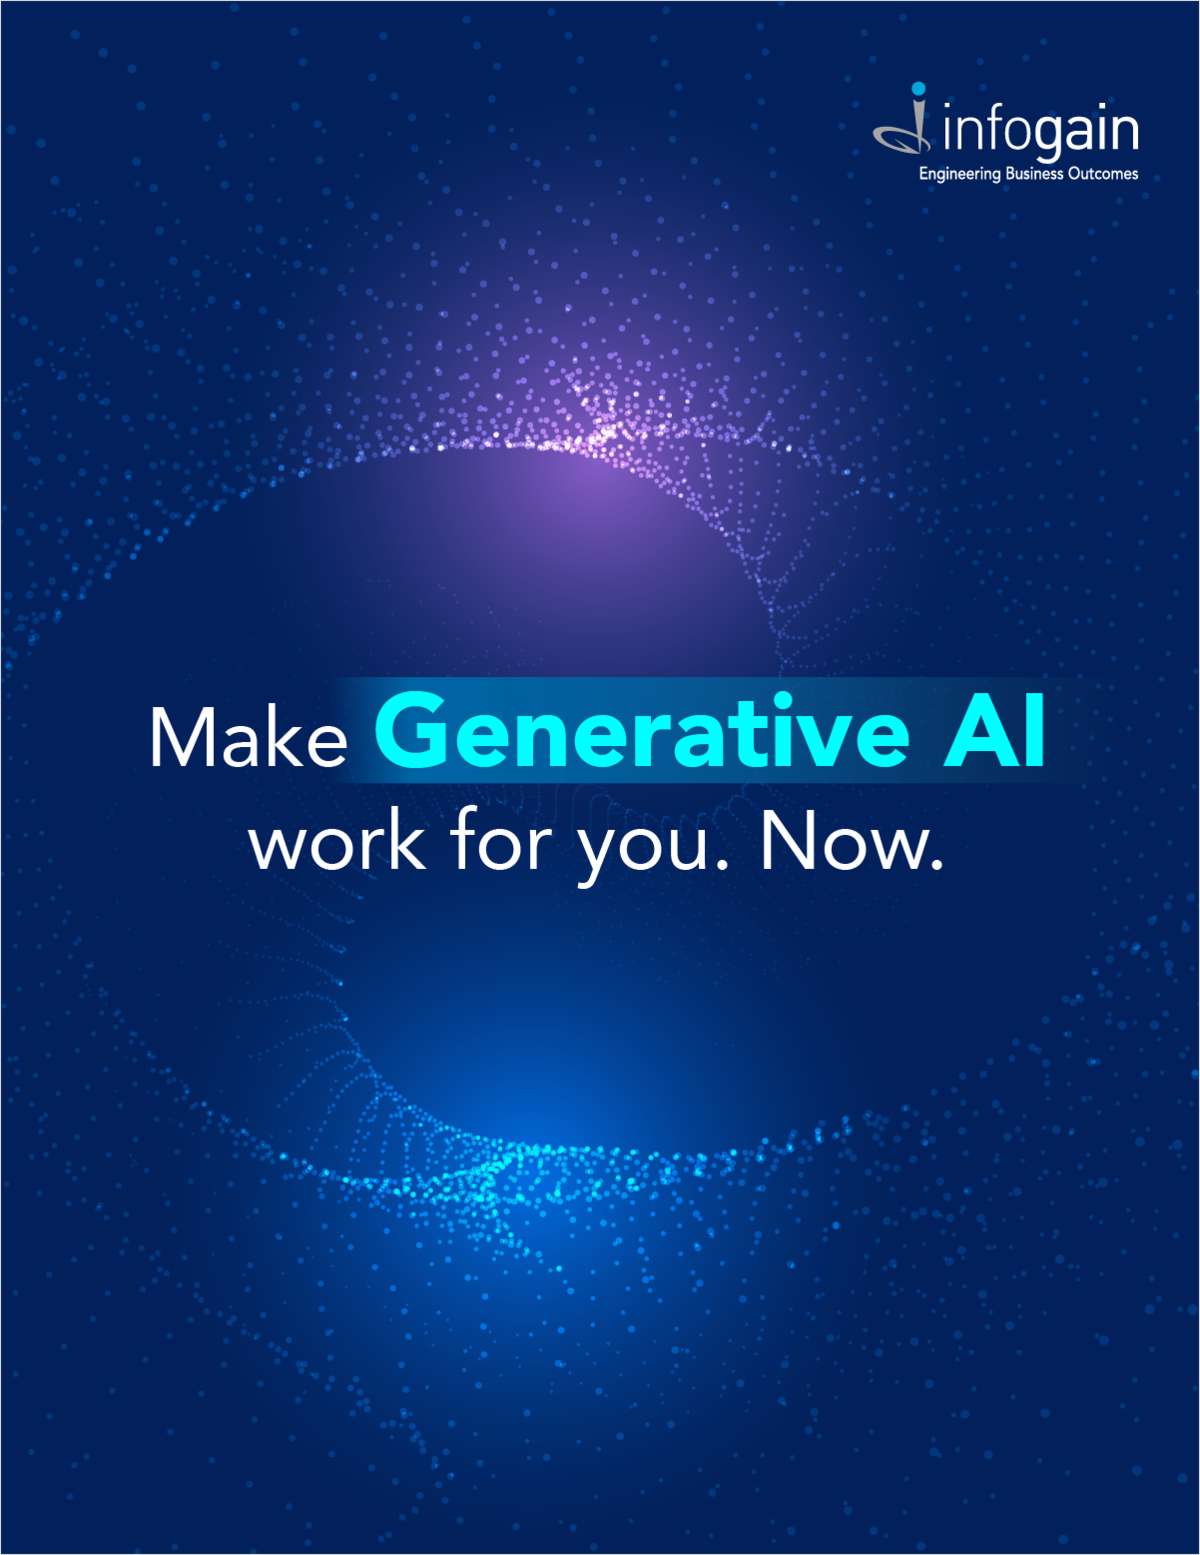 Make generative AI work for you. Now